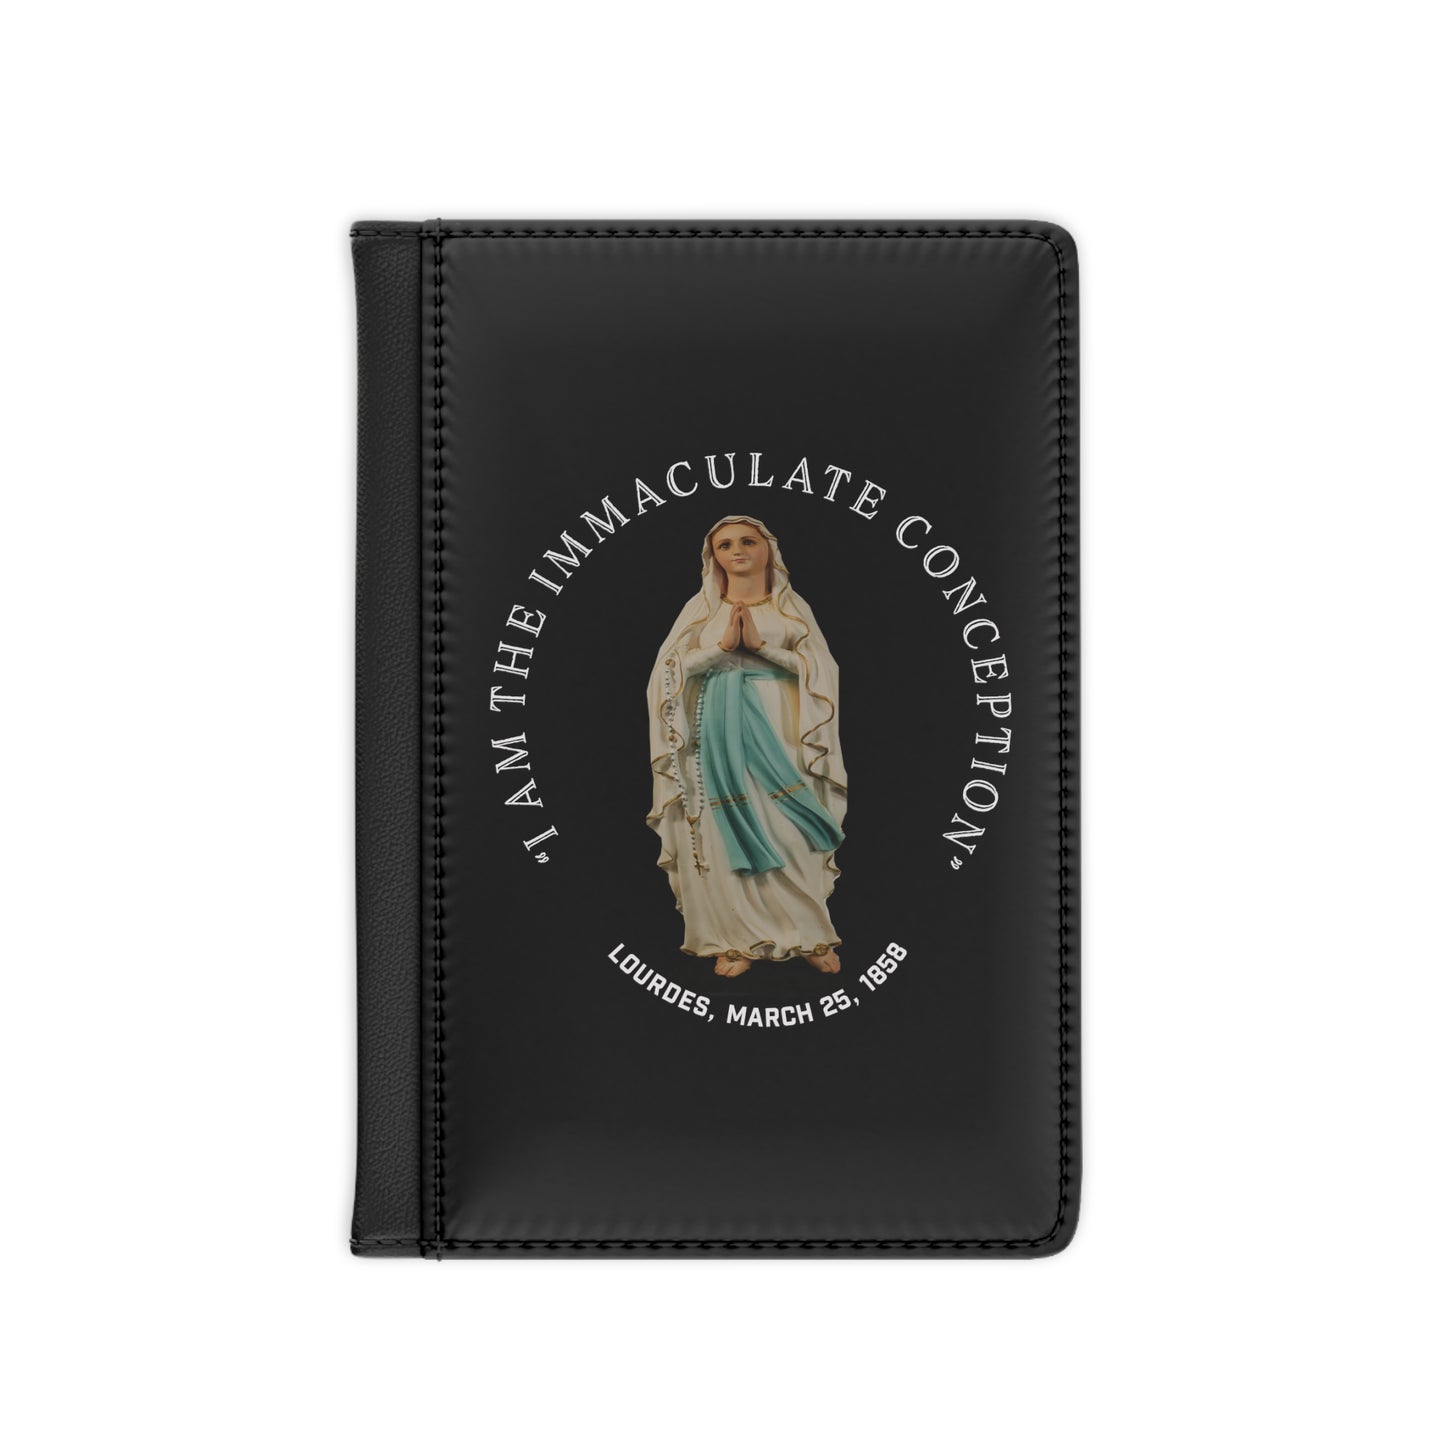 "I Am the Immaculate Conception" - Lourdes, France March 25, 1858 Passport Cover